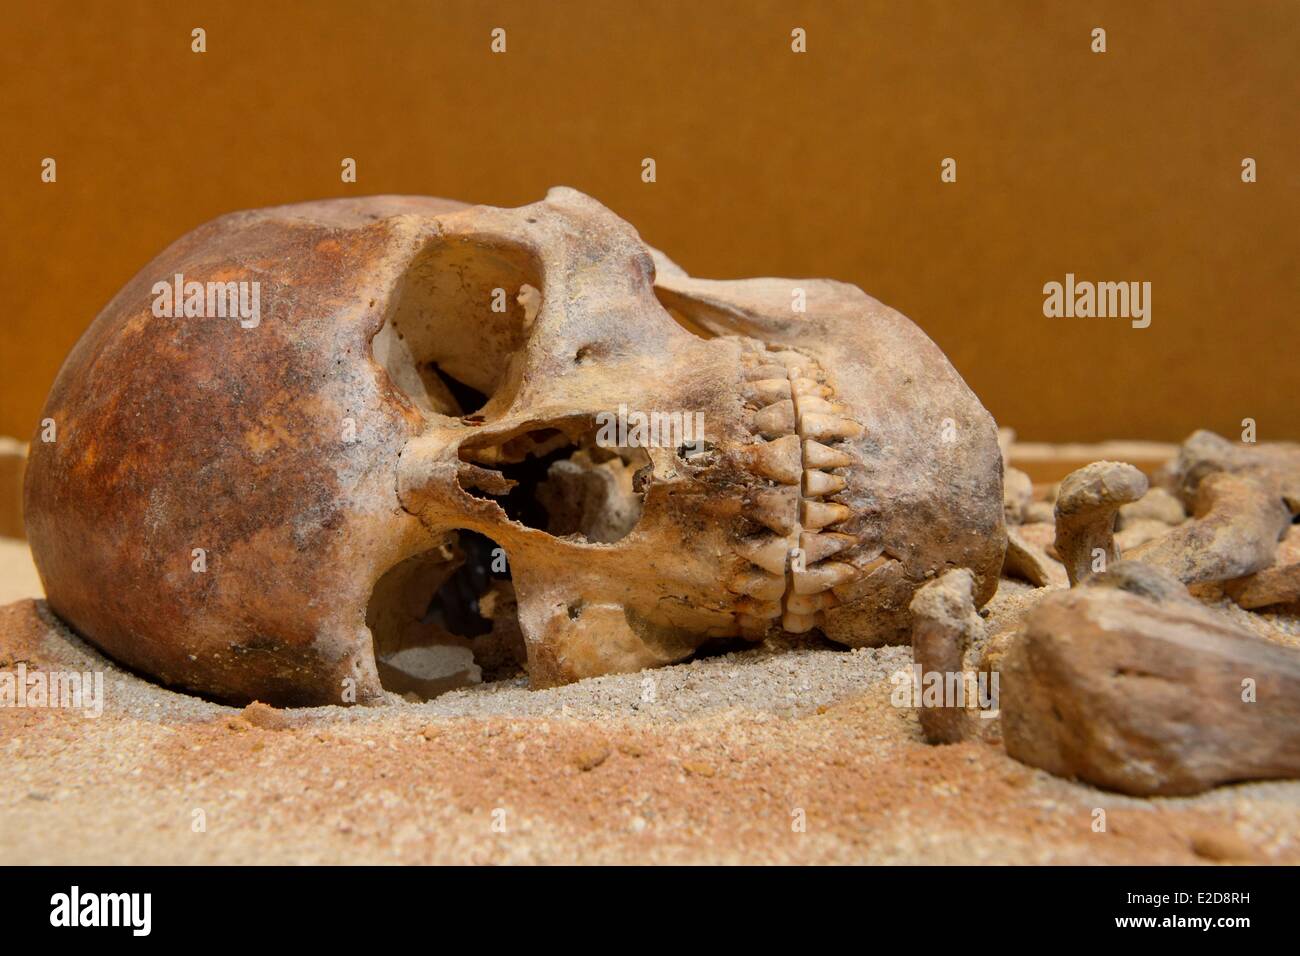 France, Corse du Sud, Alta Rocca, village of Levie, Alta Rocca Museum, the Lady of Bonifacio, the oldest human Mesolithic remains from Corsica (6570 BC) Stock Photo